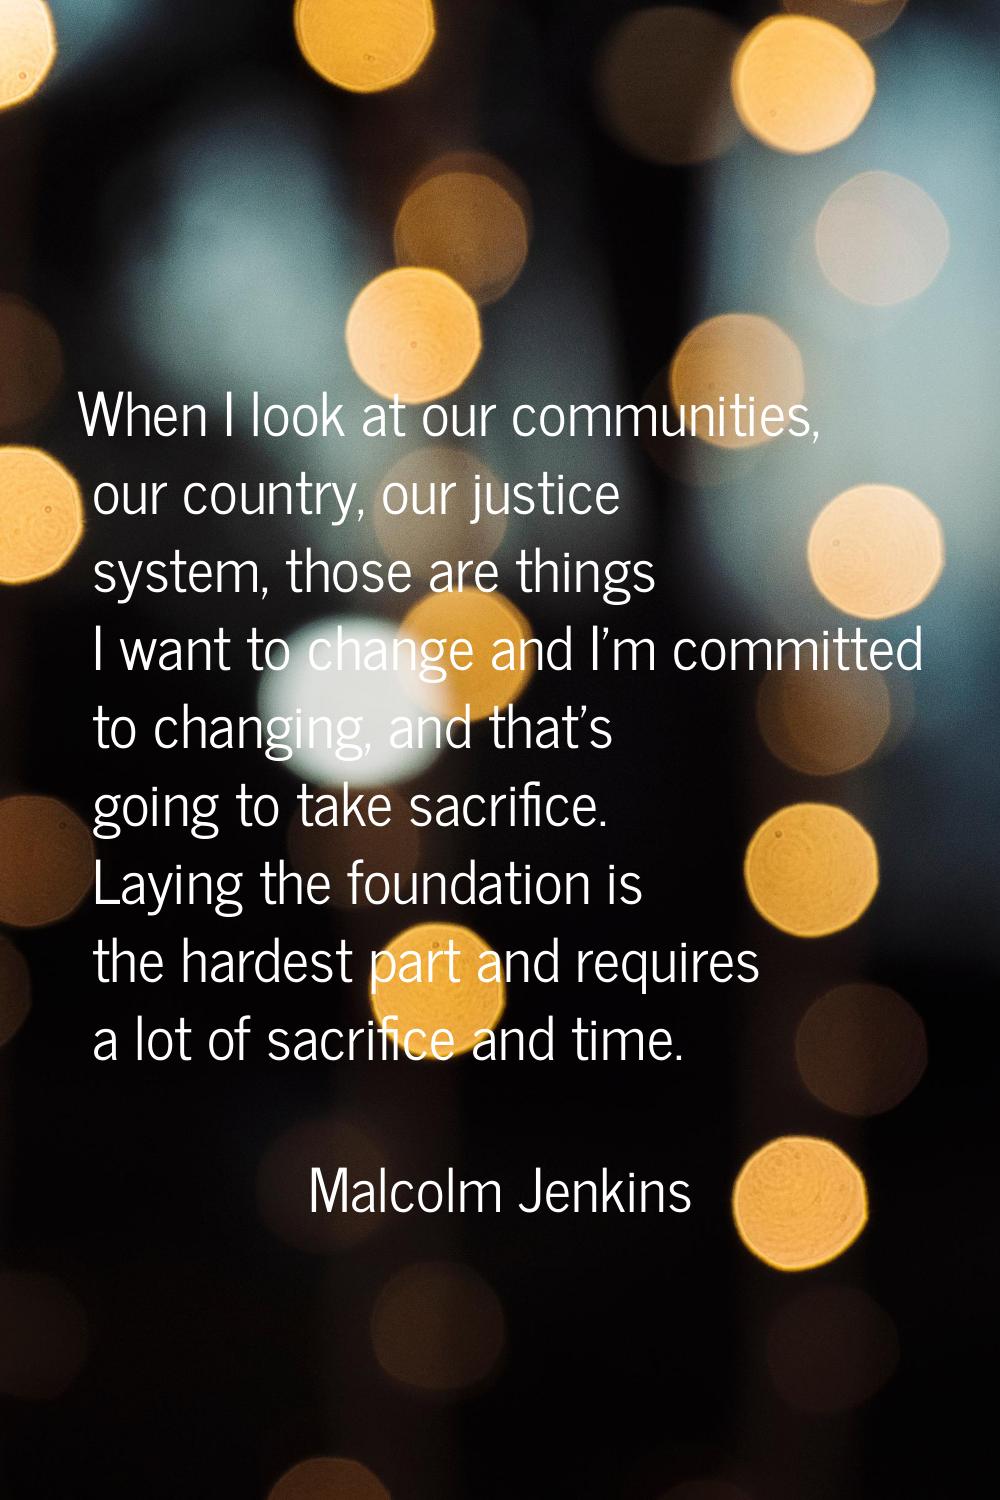 When I look at our communities, our country, our justice system, those are things I want to change 